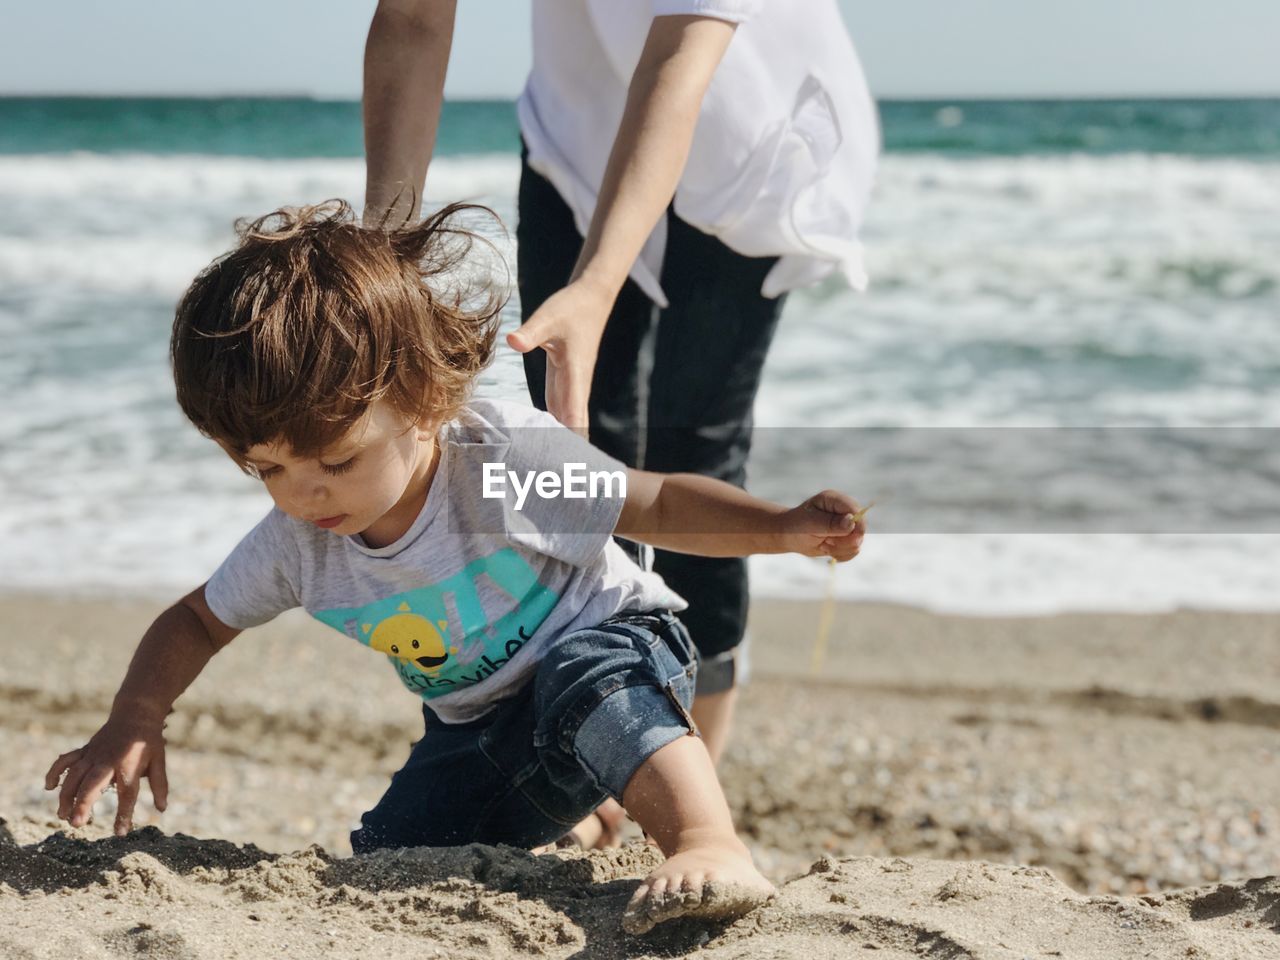 Low section of woman holding boy playing on sand at beach